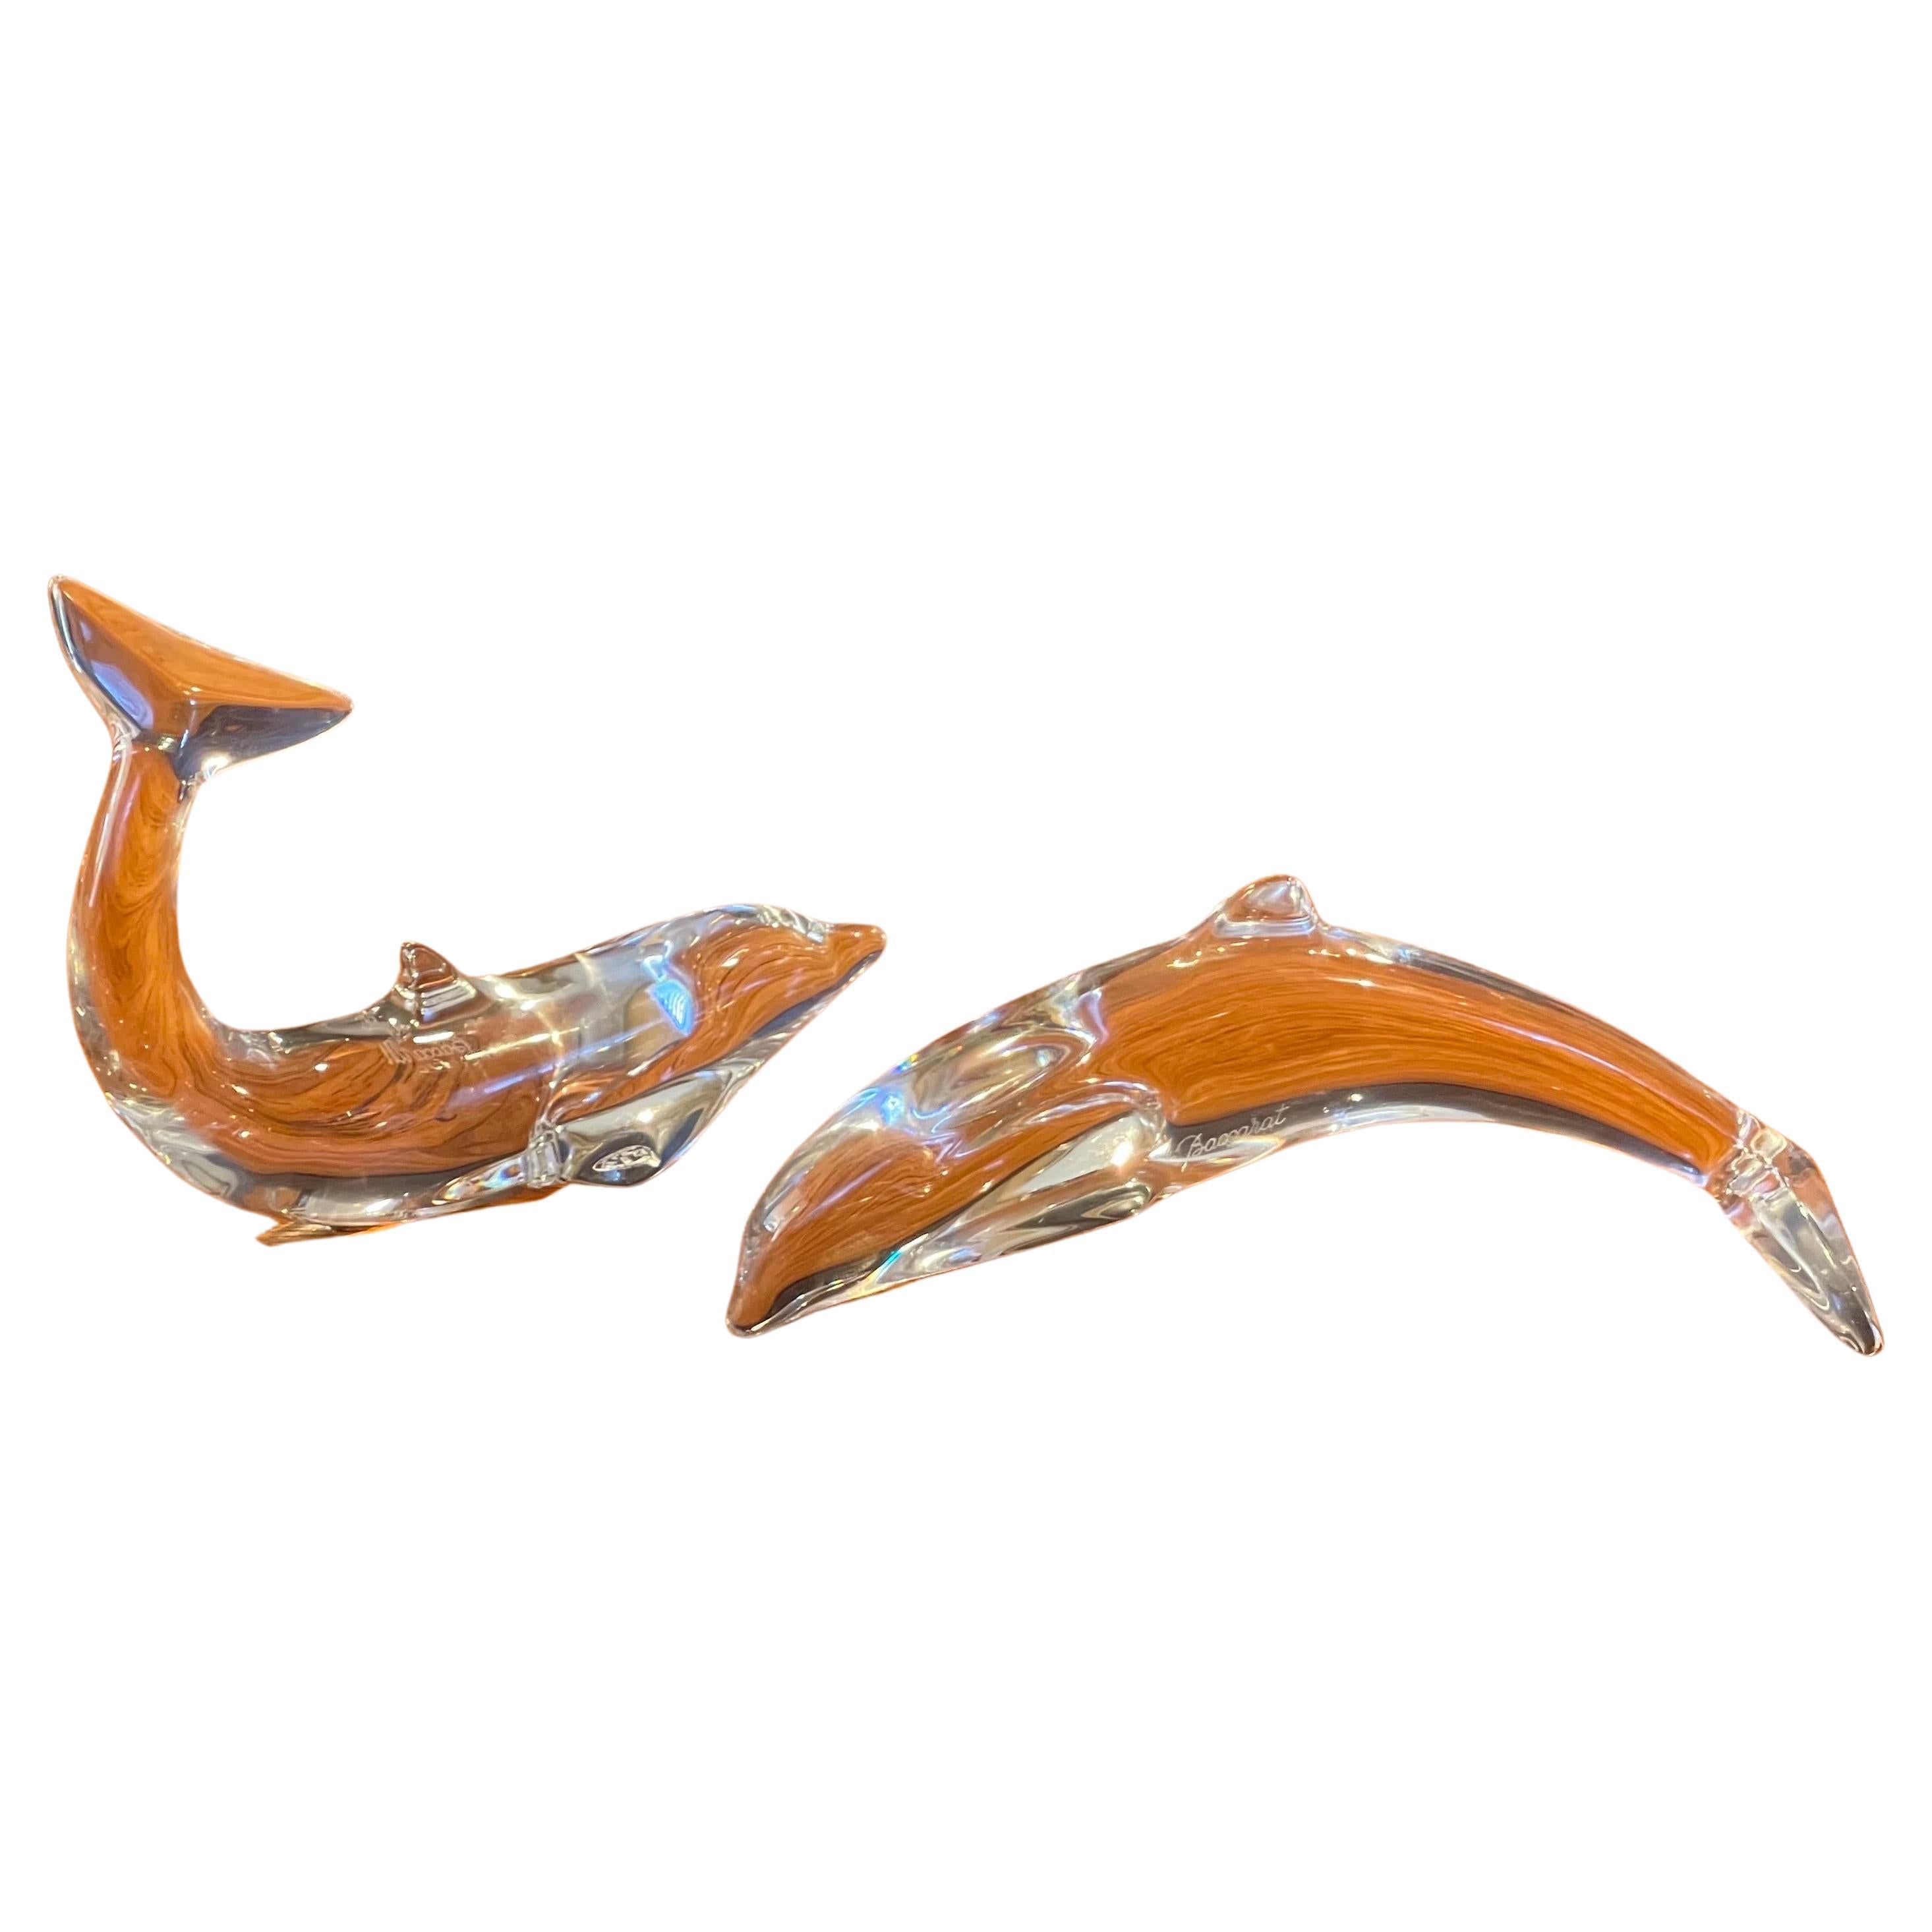 Pair of Stylized Crystal Dolphin Sculptures / Paperweights by Baccarat For Sale 4